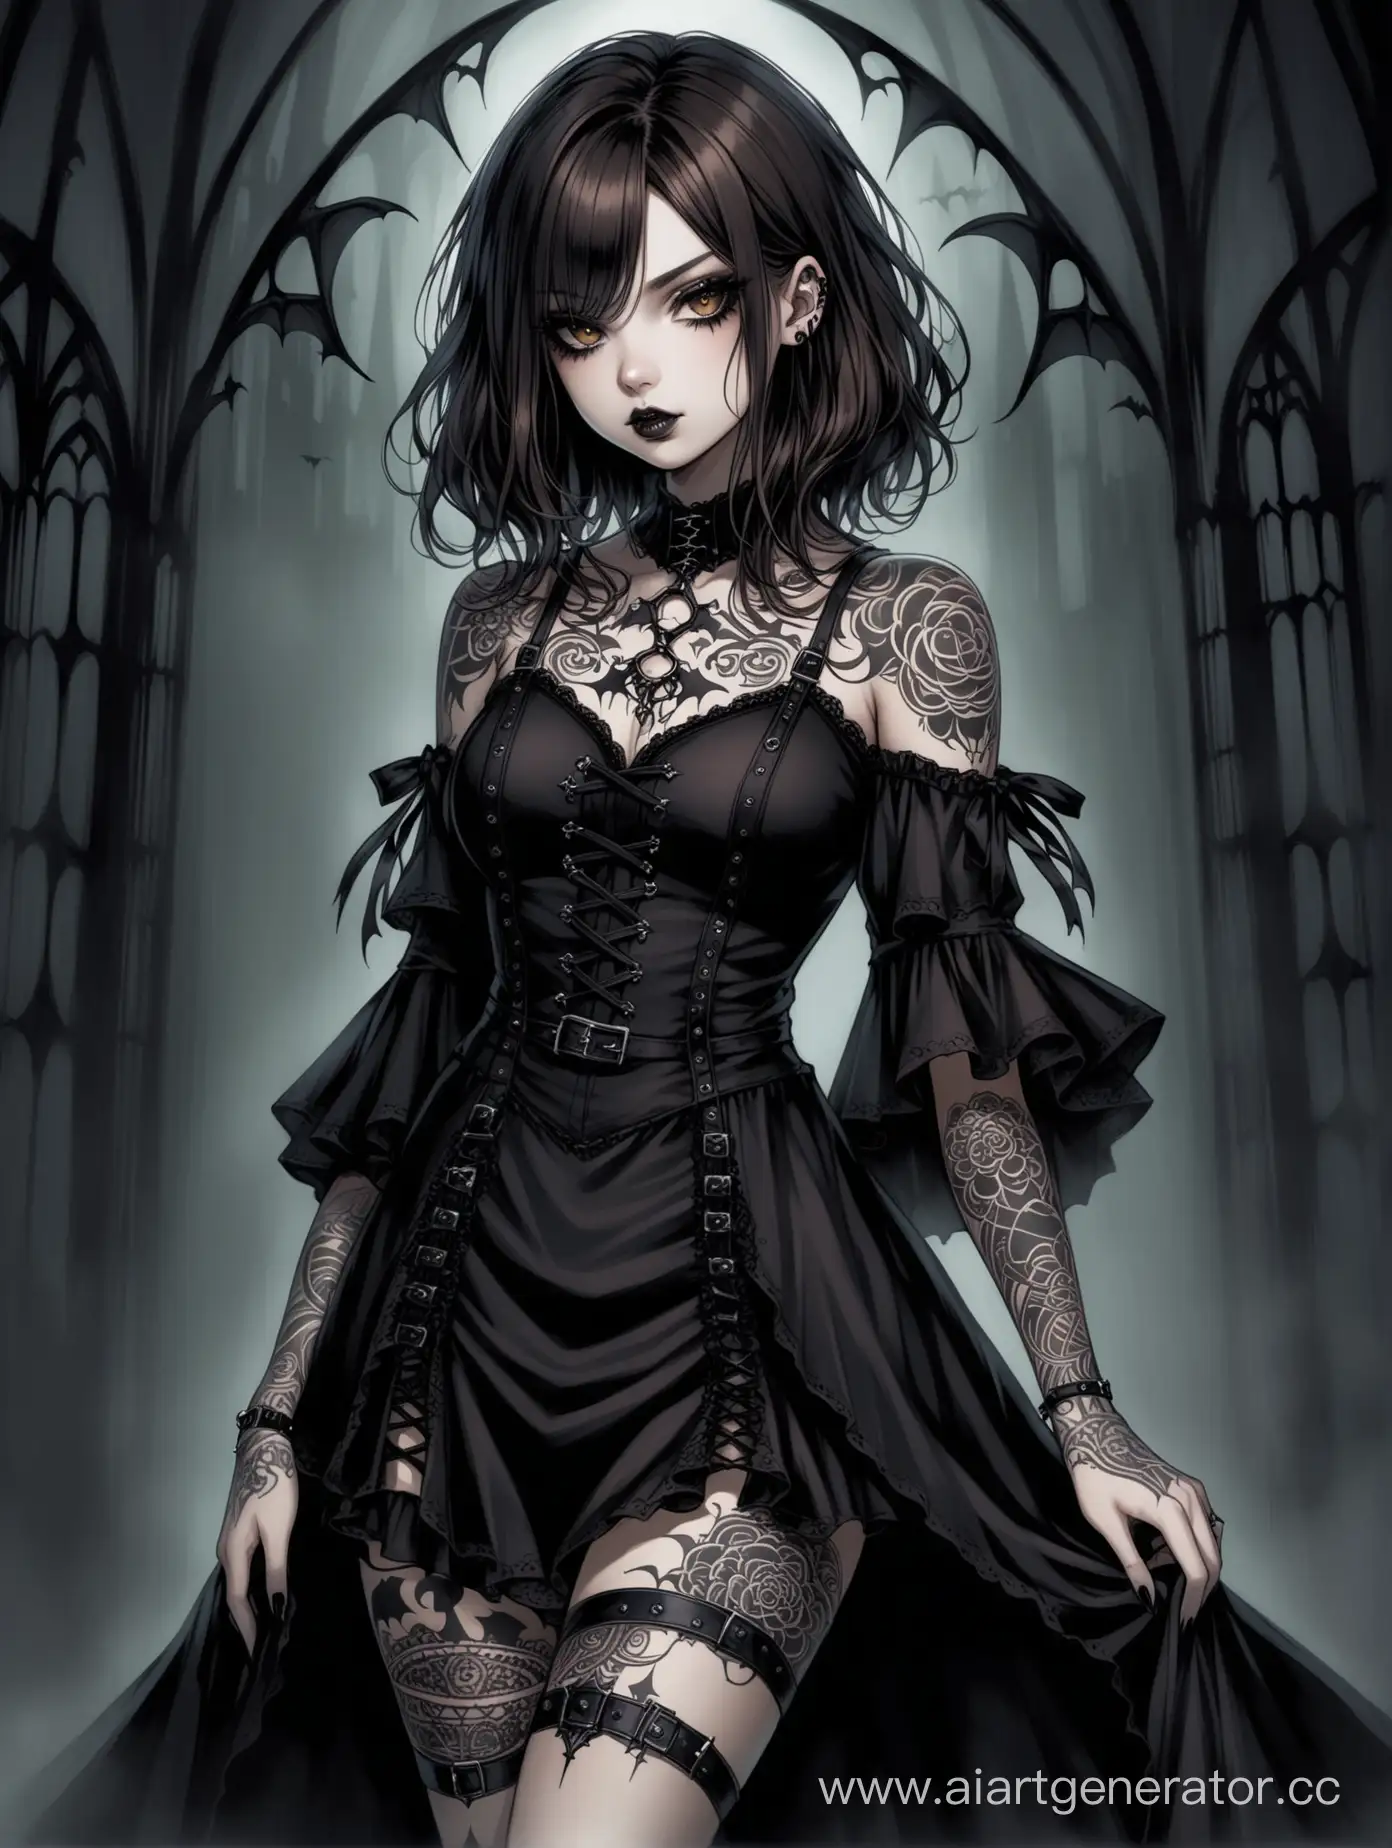 KindEyed-Gothic-Woman-with-Intricate-Tattoos-and-Accessories